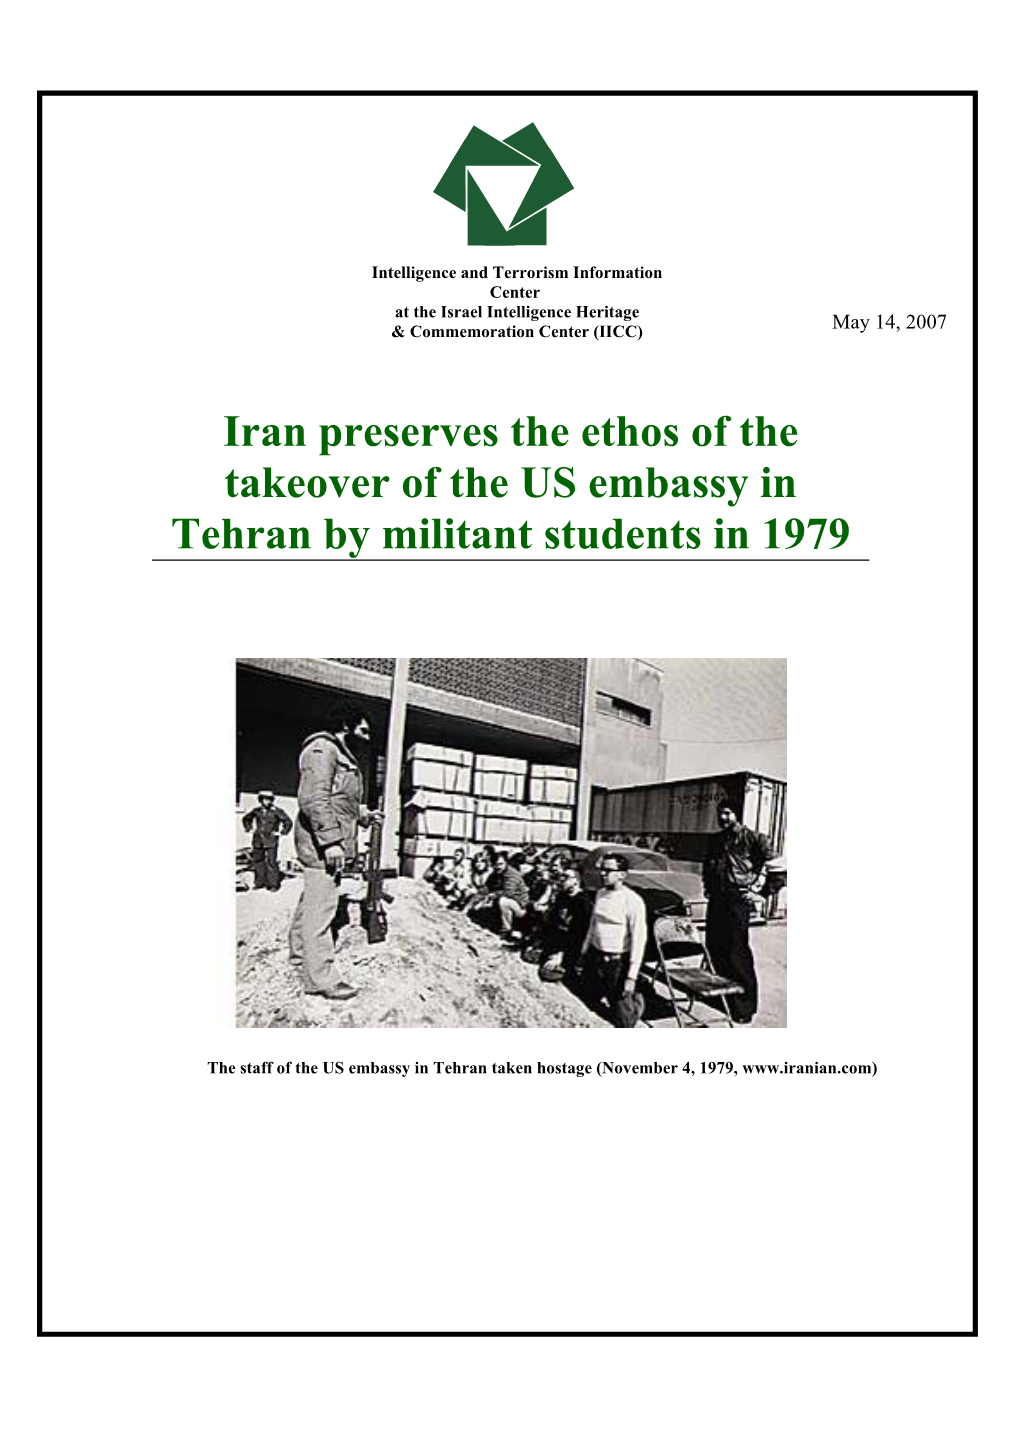 Iran Preserves the Ethos of the Takeover of the US Embassy in Tehran by Militant Students in 1979